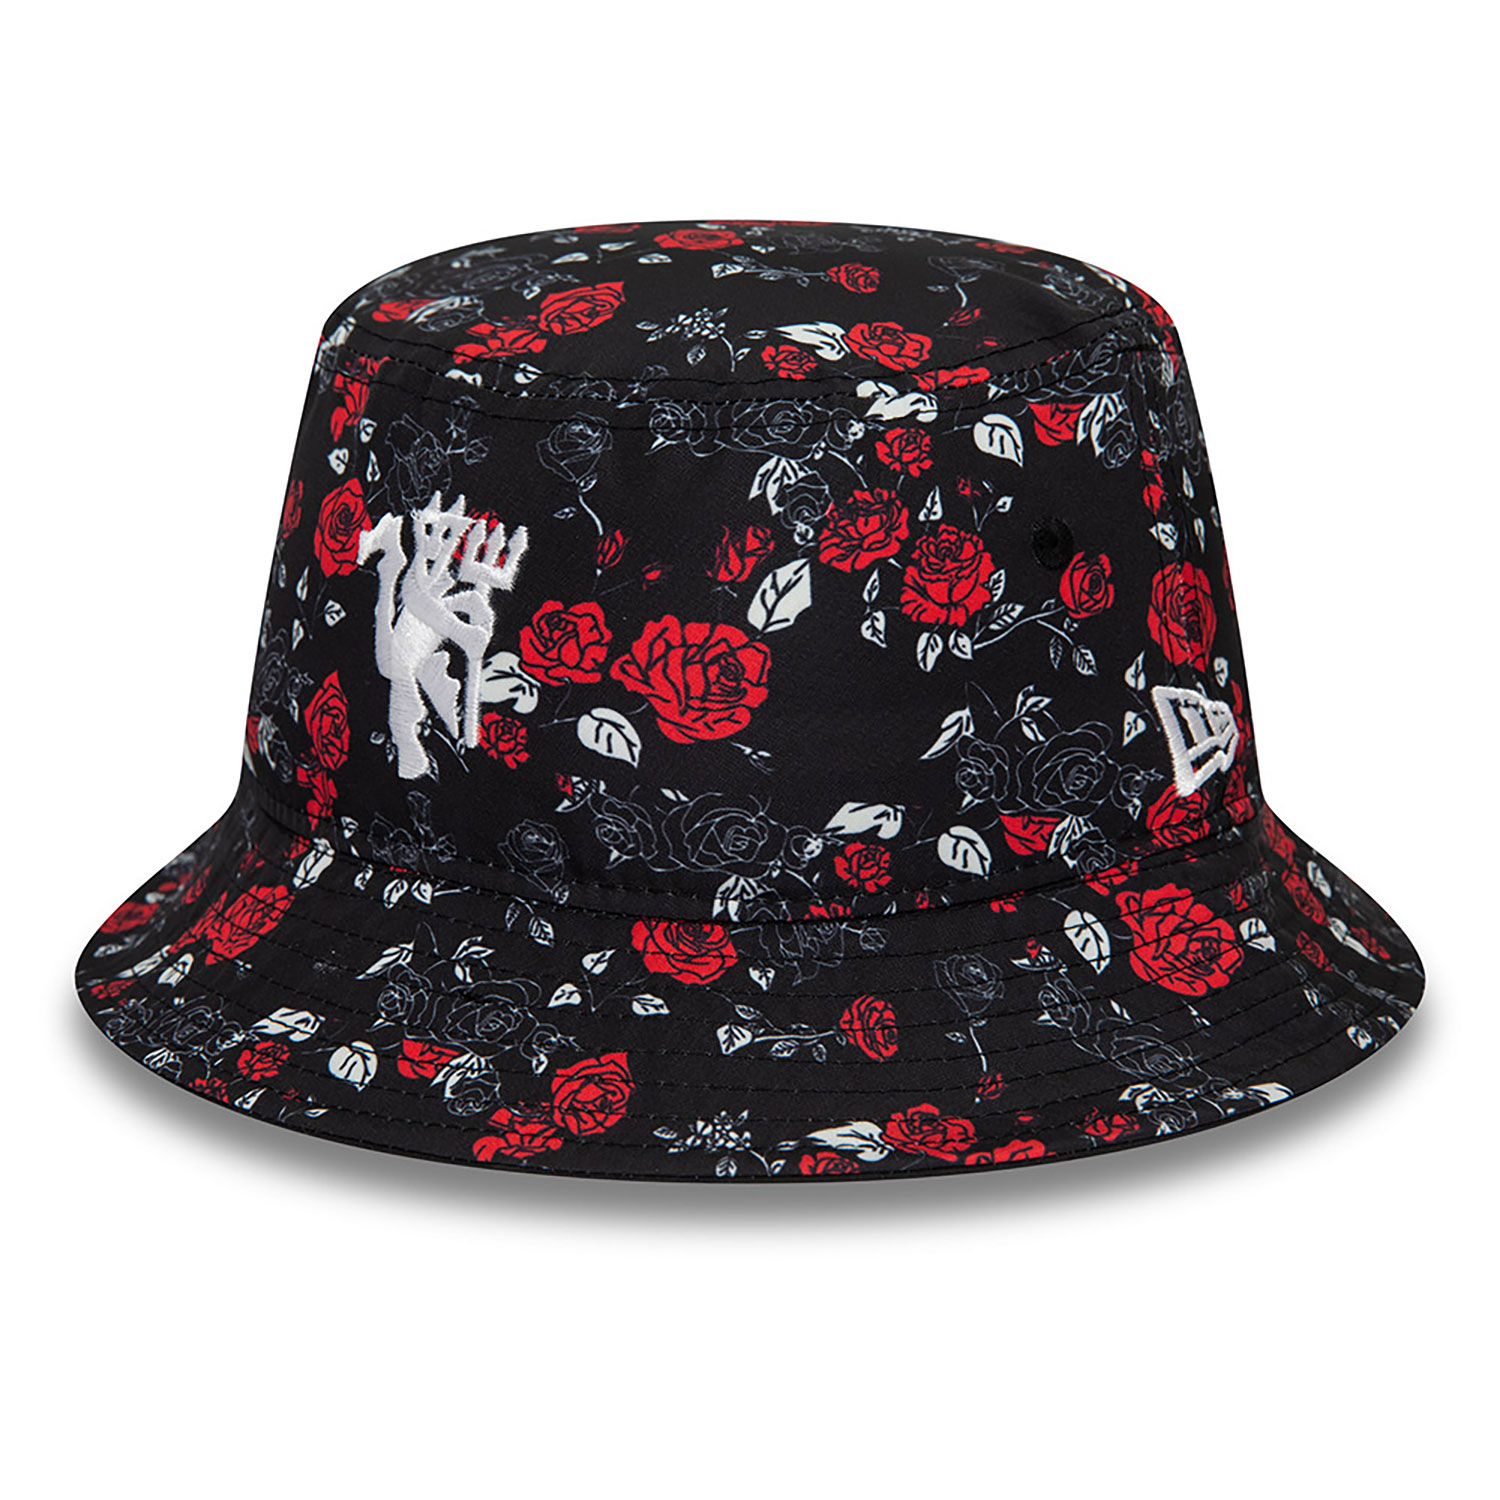 Floral All Over Print Manchester United FC Bucket Hat